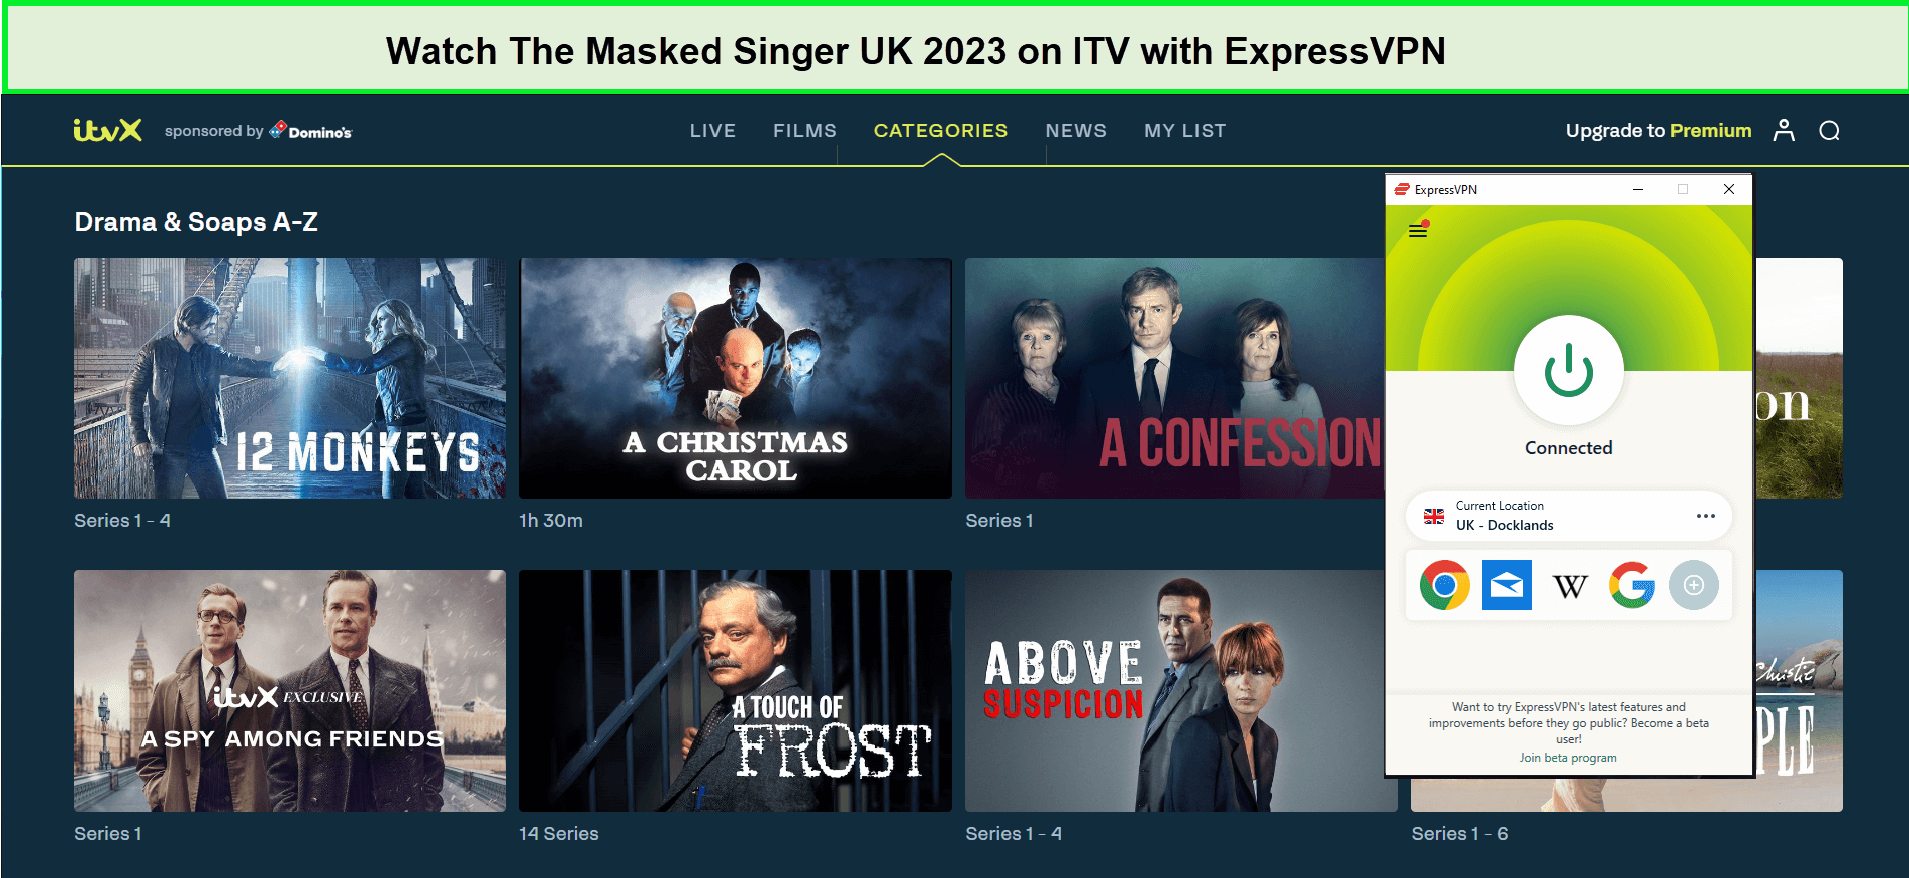 Watch-The-Masked-Singer-UK-2023-in-UAE-on-ITV-with-ExpressVPN